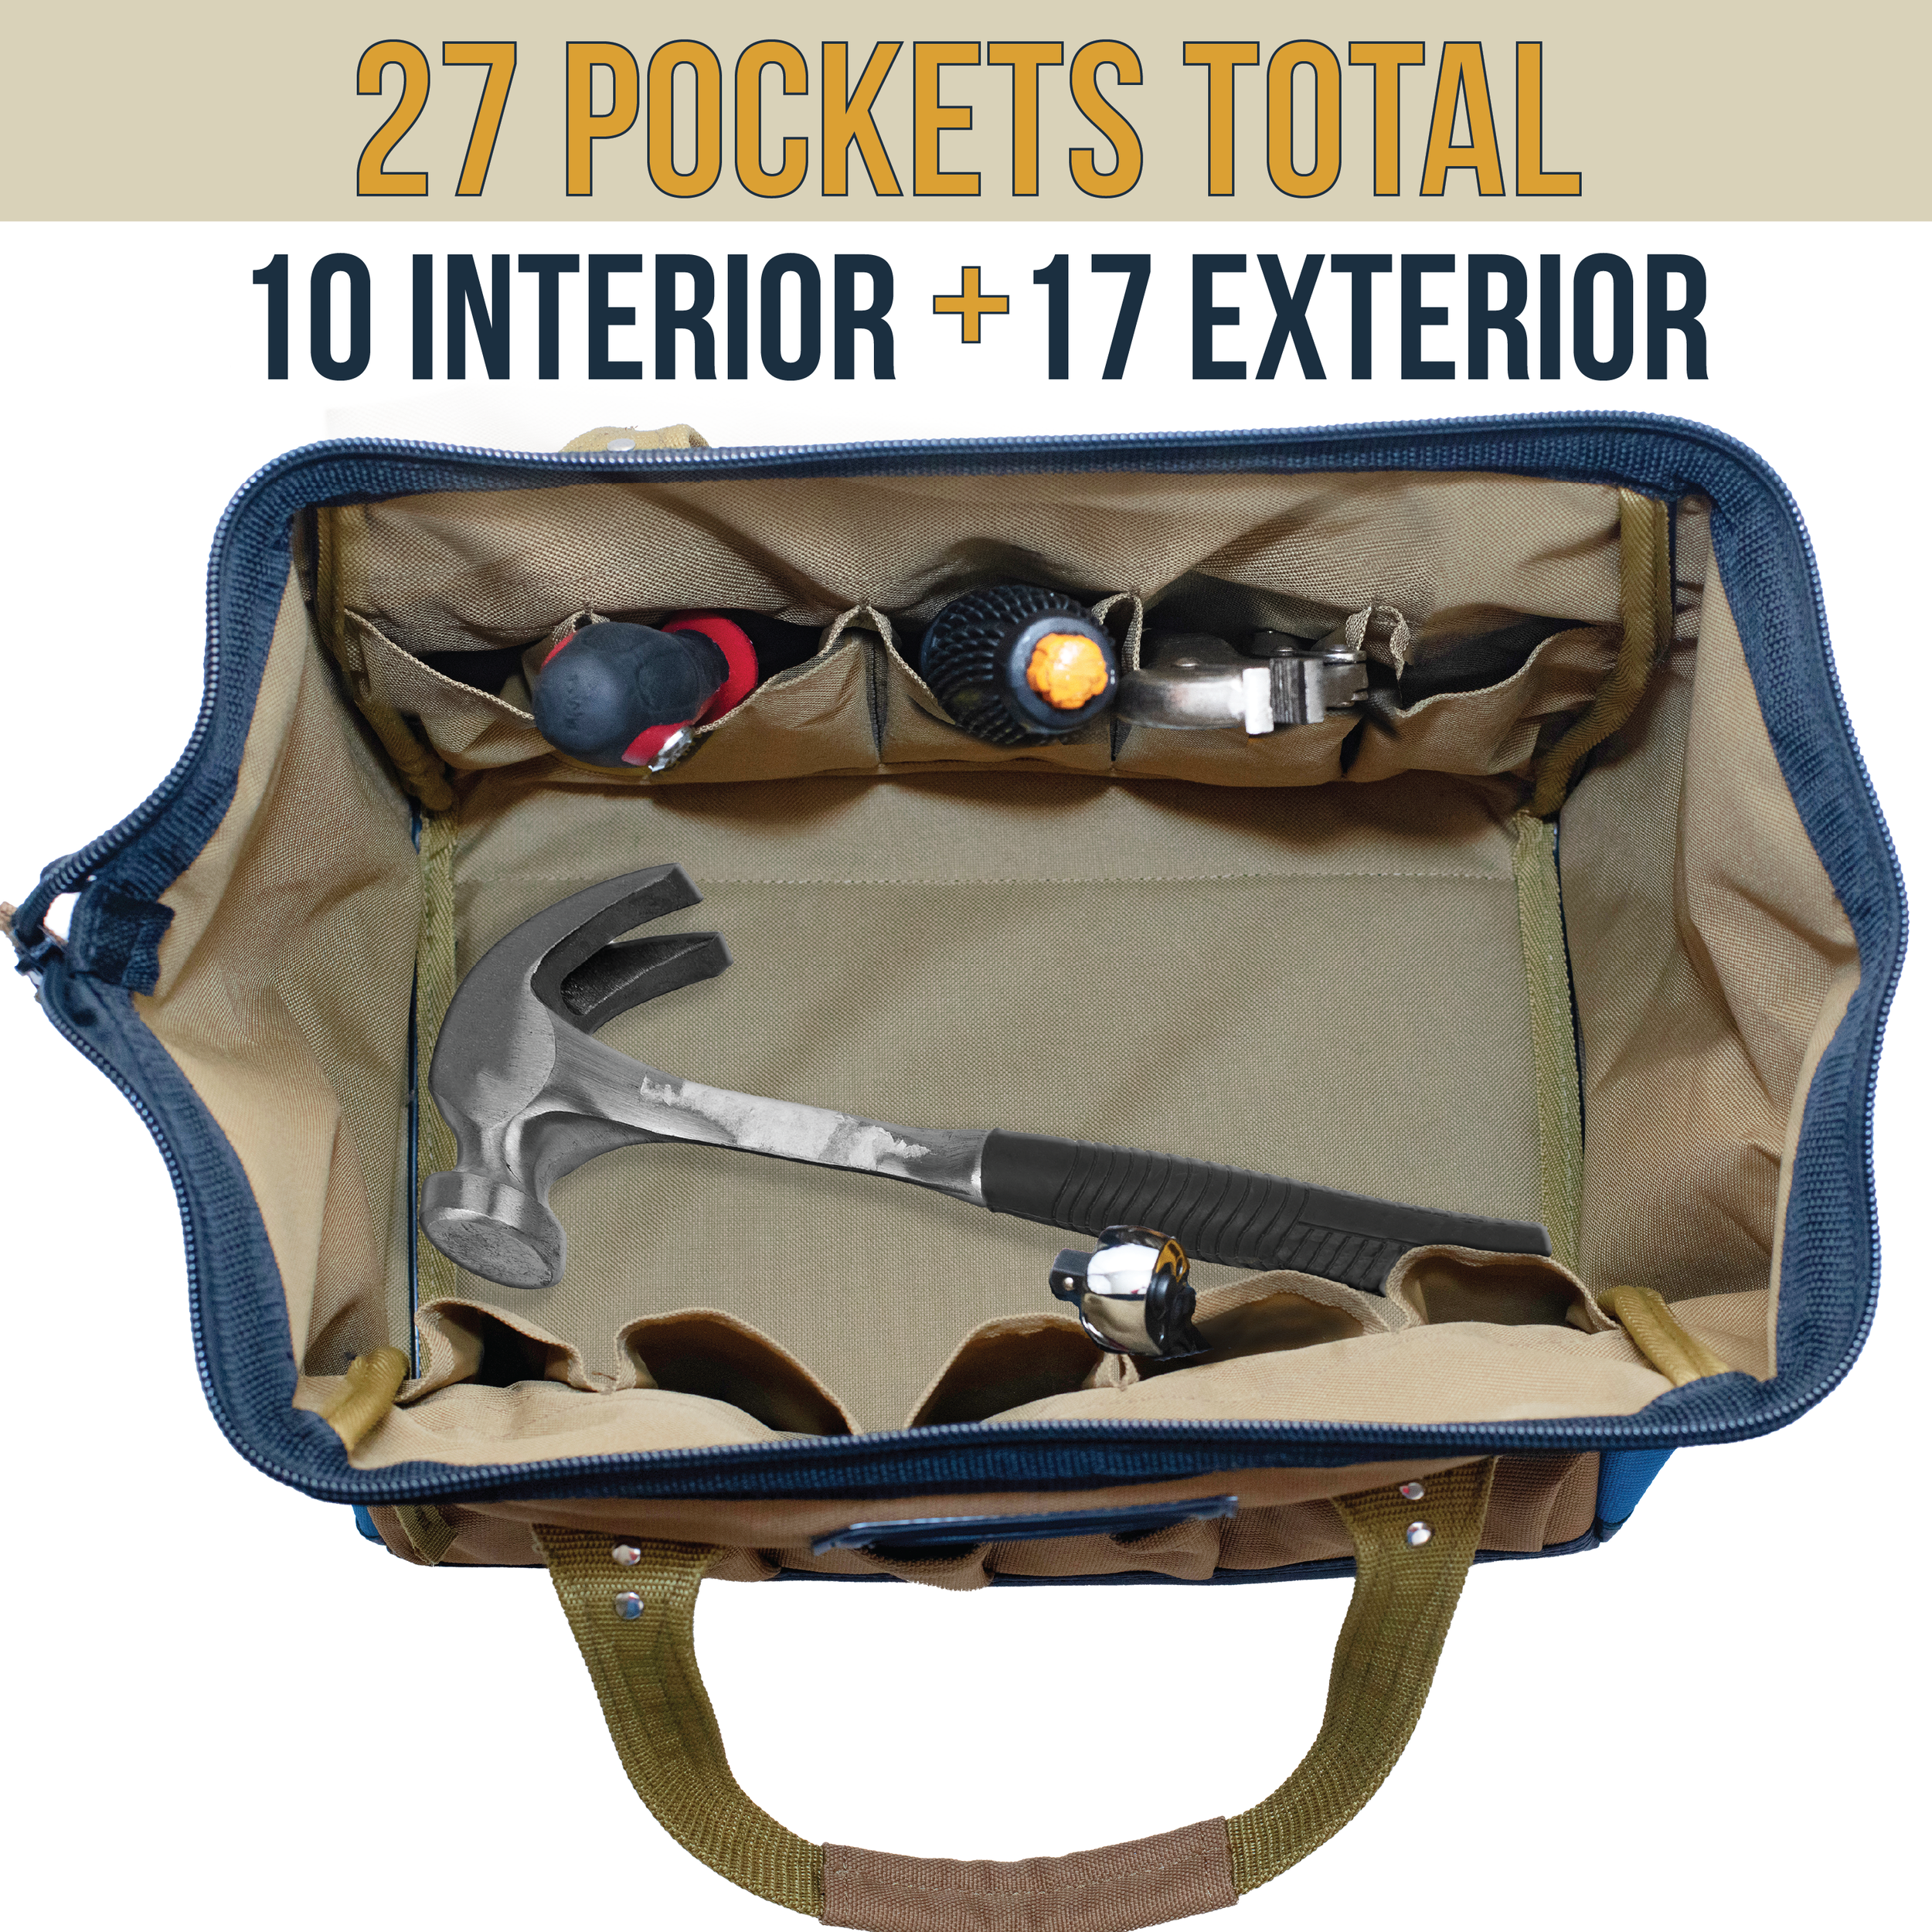 Rugged Tools Wide-Mouth Tool Bag Listing5.png